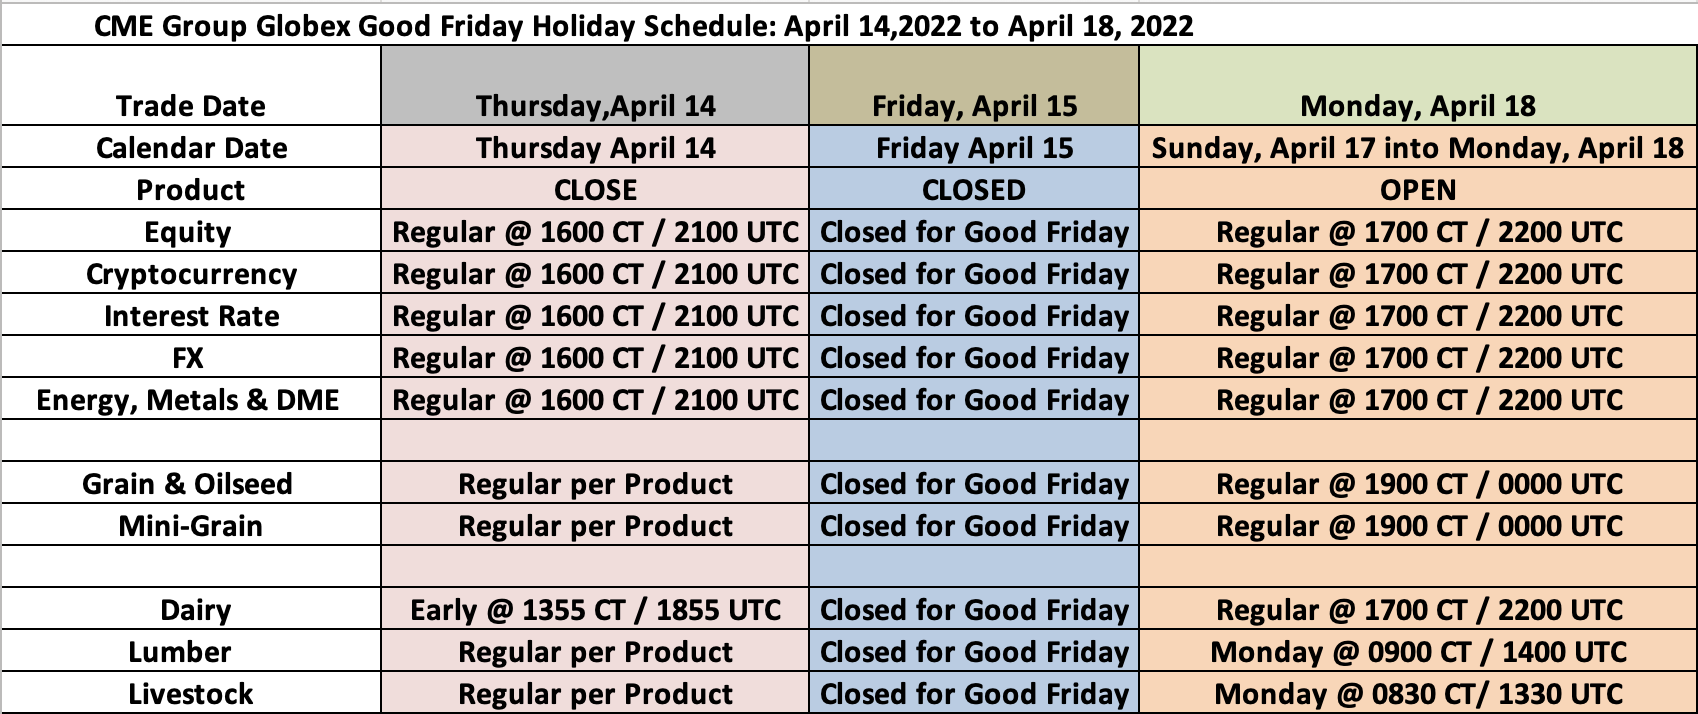 Good Friday Holiday Trading Schedule 2022